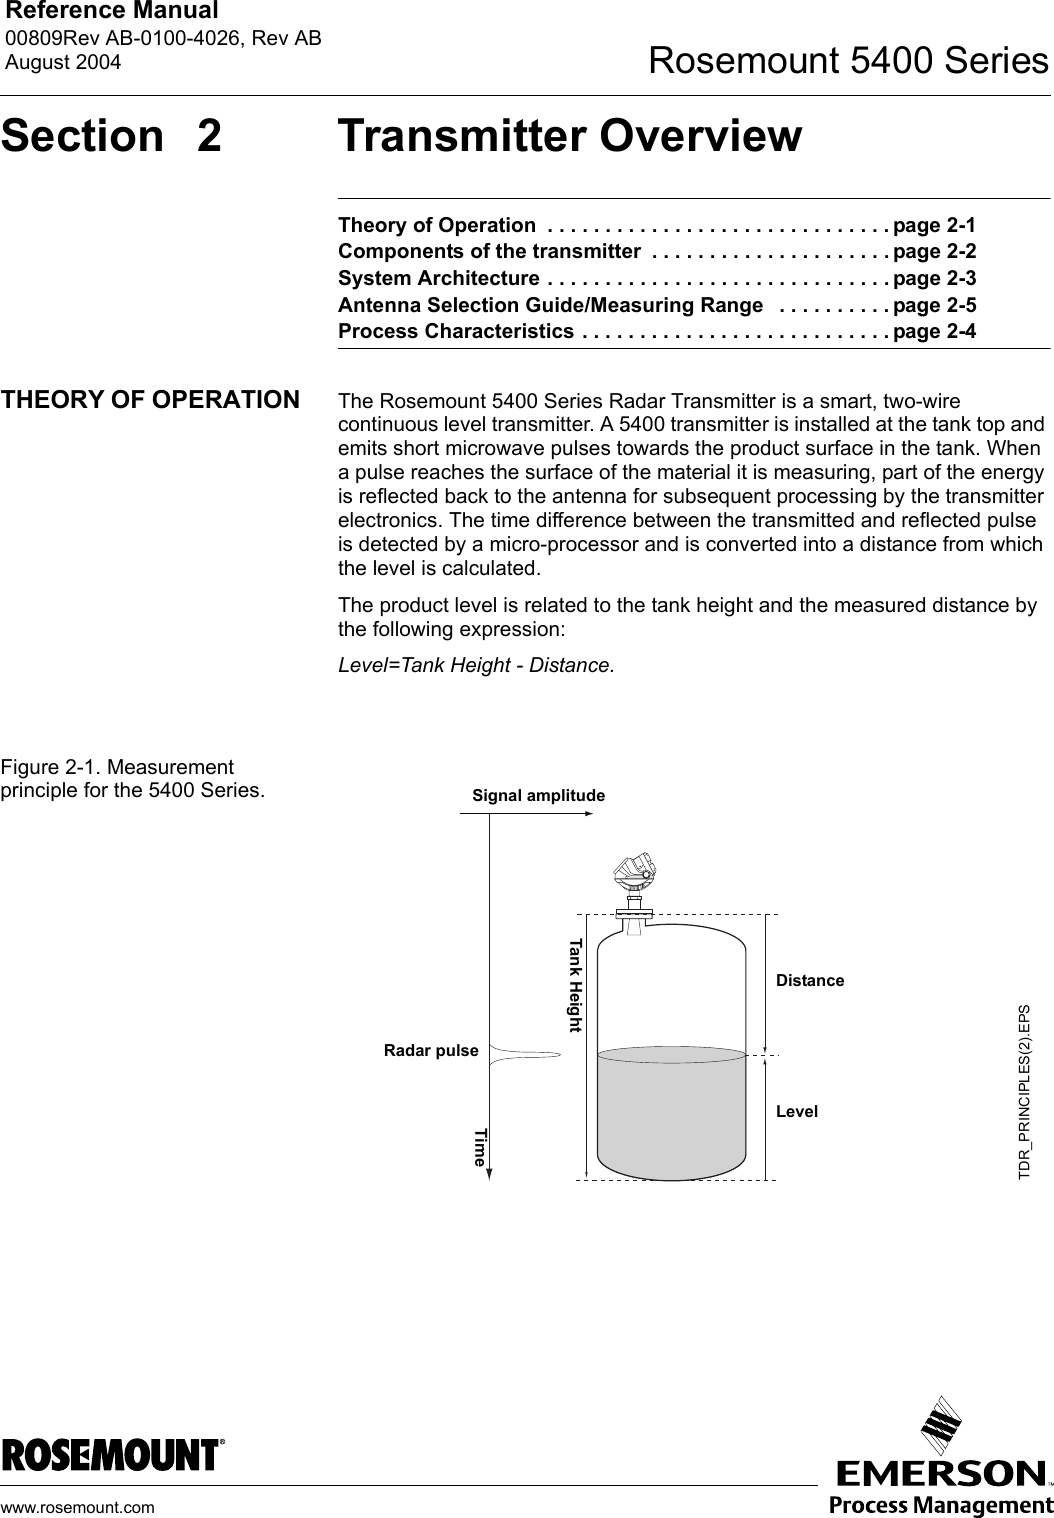 Reference Manual 00809Rev AB-0100-4026, Rev ABAugust 2004 Rosemount 5400 Serieswww.rosemount.comSection 2 Transmitter OverviewTheory of Operation  . . . . . . . . . . . . . . . . . . . . . . . . . . . . . . page 2-1Components of the transmitter  . . . . . . . . . . . . . . . . . . . . . page 2-2System Architecture . . . . . . . . . . . . . . . . . . . . . . . . . . . . . . page 2-3Antenna Selection Guide/Measuring Range   . . . . . . . . . . page 2-5Process Characteristics . . . . . . . . . . . . . . . . . . . . . . . . . . . page 2-4THEORY OF OPERATION The Rosemount 5400 Series Radar Transmitter is a smart, two-wire continuous level transmitter. A 5400 transmitter is installed at the tank top and emits short microwave pulses towards the product surface in the tank. When a pulse reaches the surface of the material it is measuring, part of the energy is reflected back to the antenna for subsequent processing by the transmitter electronics. The time difference between the transmitted and reflected pulse is detected by a micro-processor and is converted into a distance from which the level is calculated.The product level is related to the tank height and the measured distance by the following expression:Level=Tank Height - Distance.Figure 2-1. Measurement principle for the 5400 Series.TDR_PRINCIPLES(2).EPSRadar pulseTimeSignal amplitudeLevelDistanceTank Height